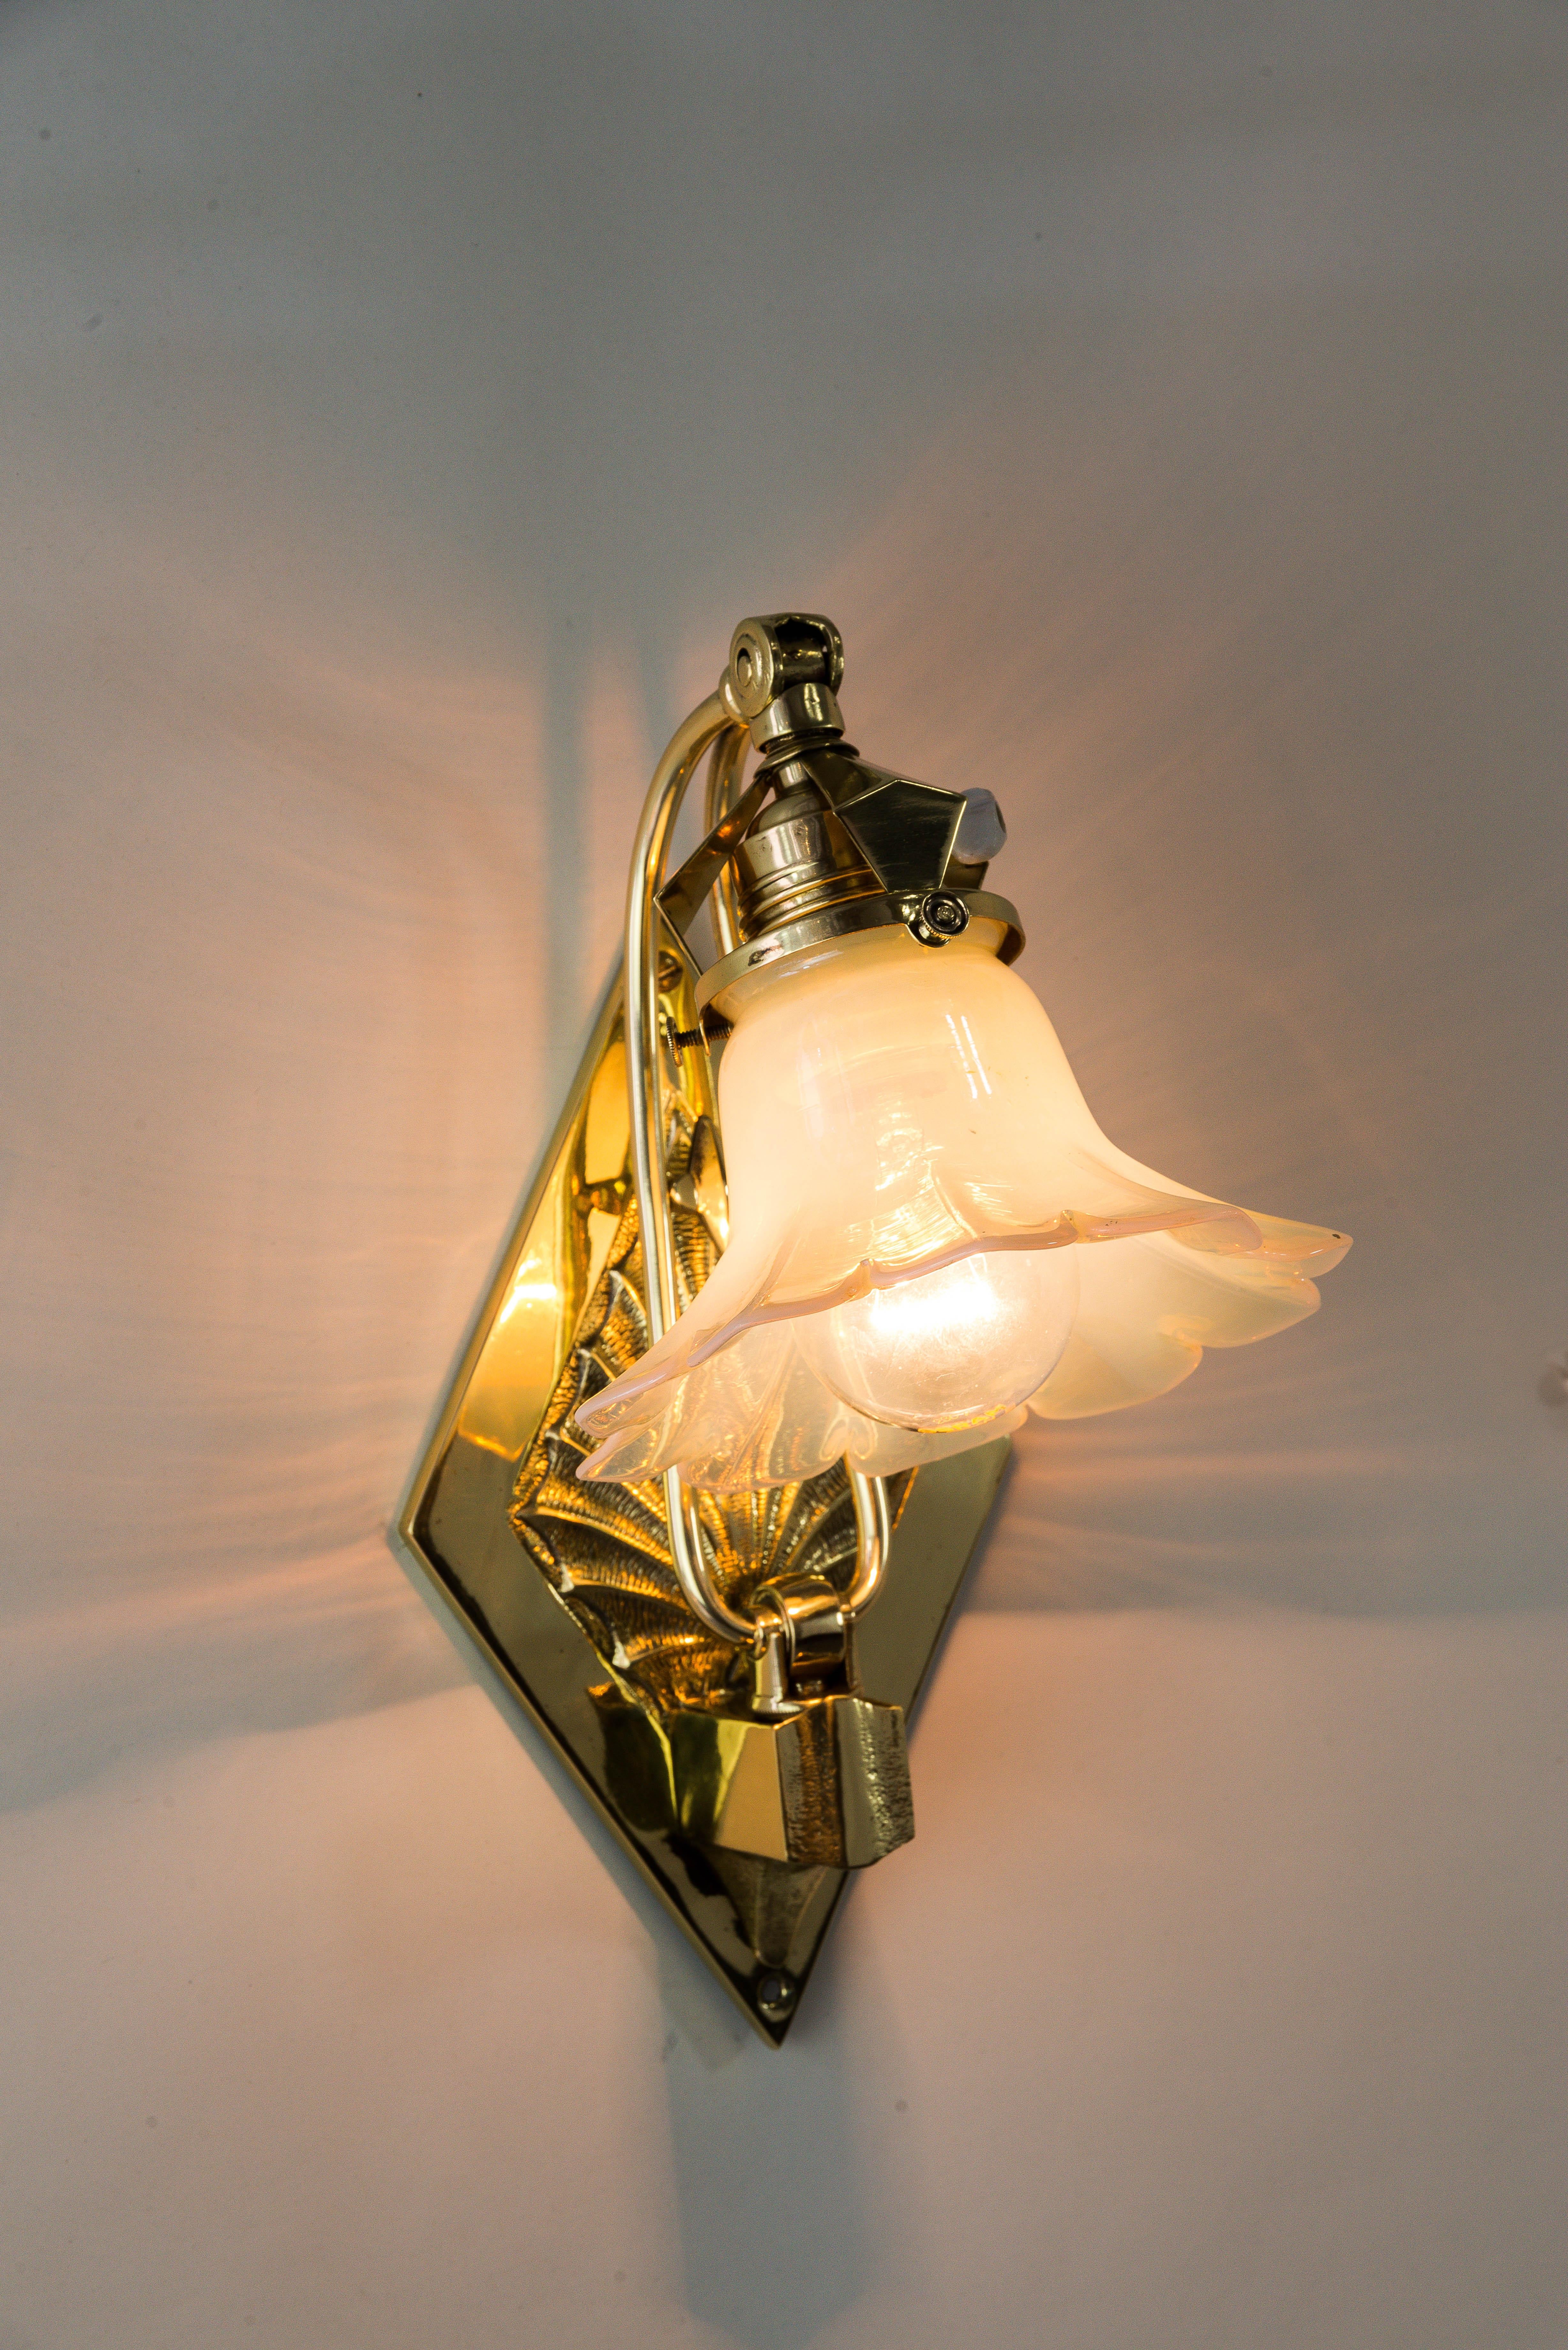 Adjustable Art Deco Wall Lamp circa 1920s with Opaline Glass Shade 9